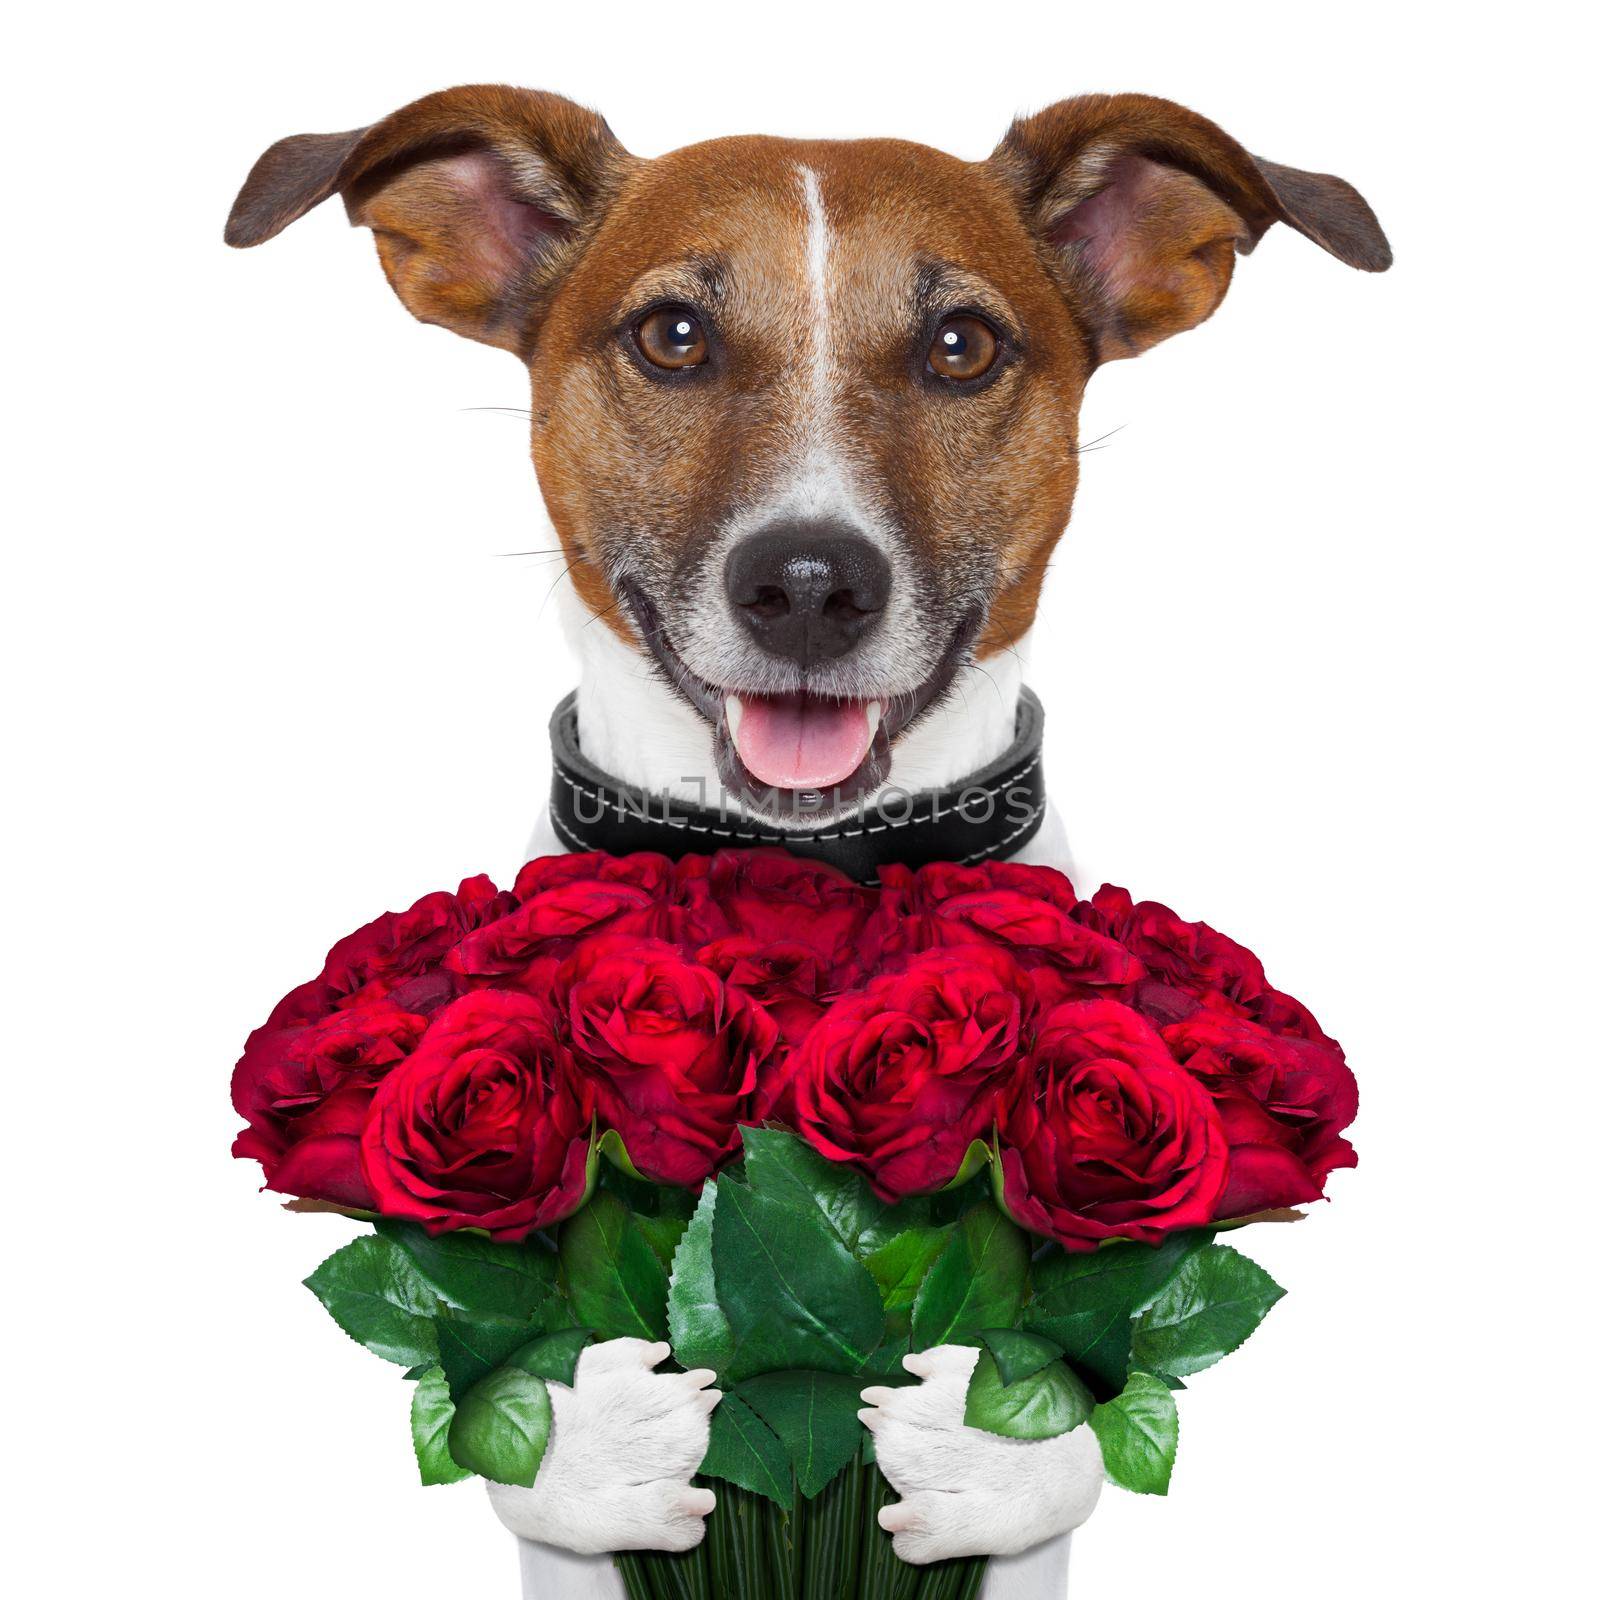 valentine dog  with a bouquet of  red  roses